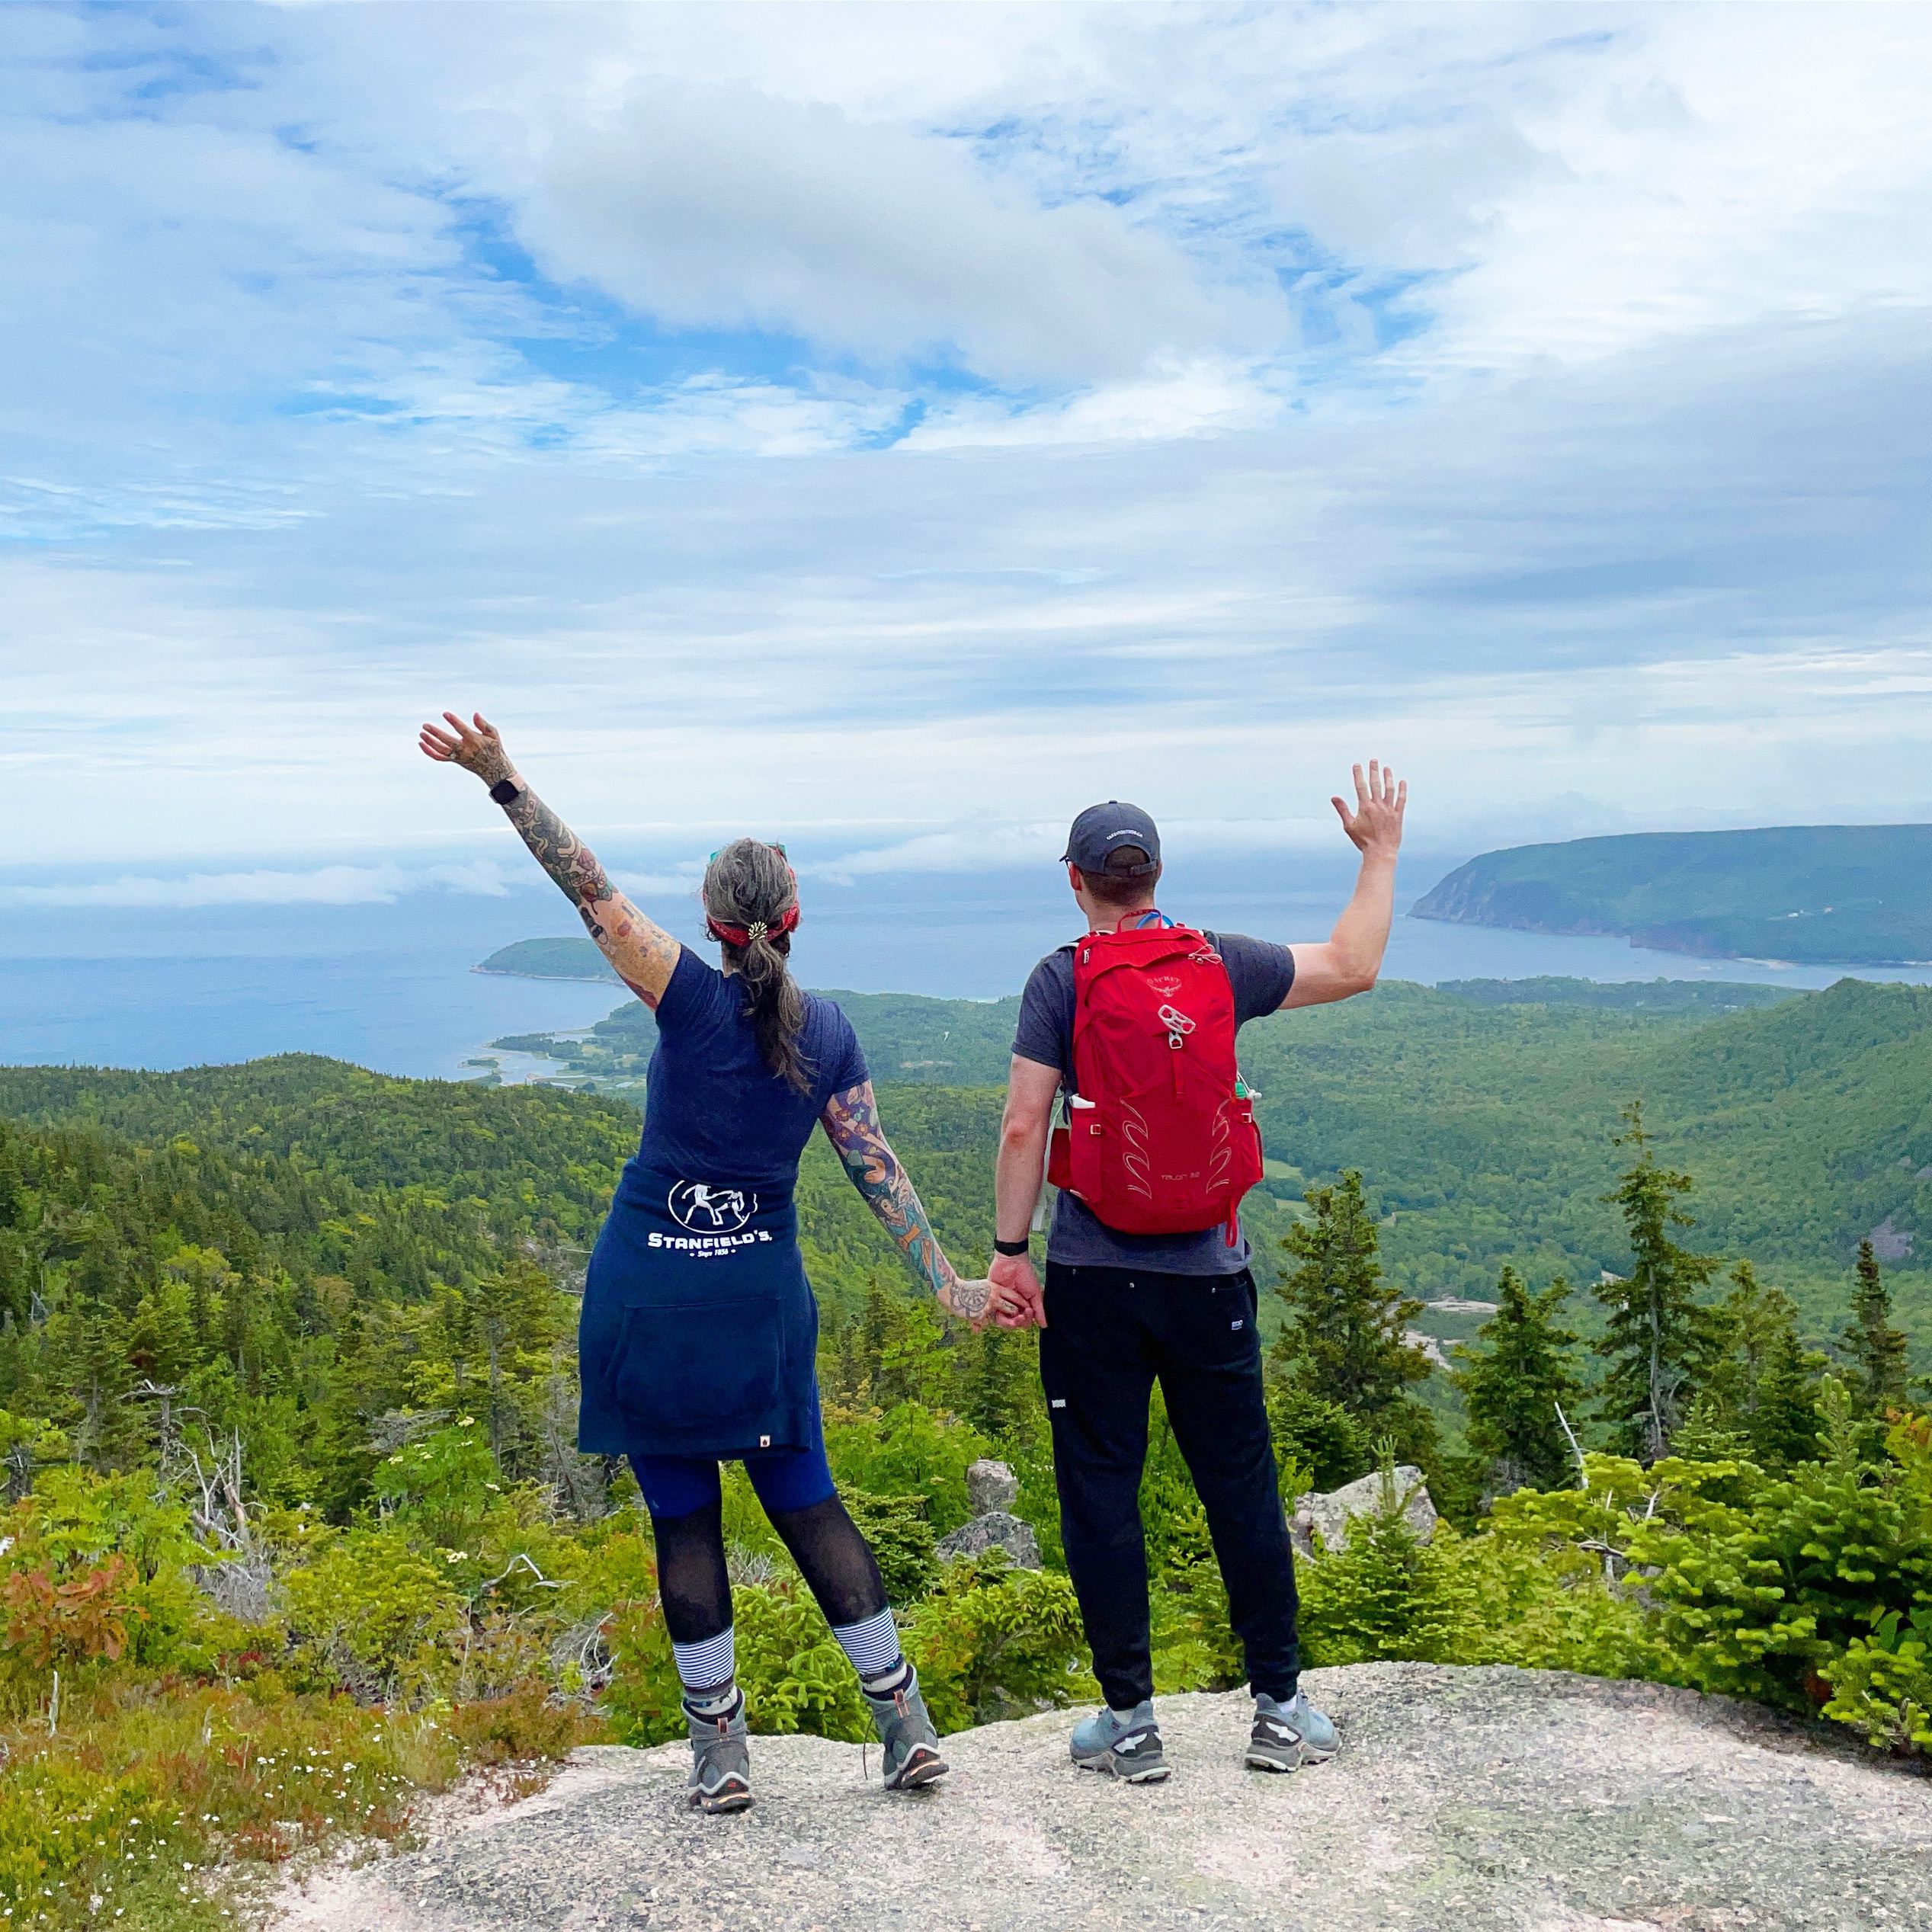 A man and woman hold hands and wave out to the ocean as they stand on top of a hiking summit surrounded by trees below